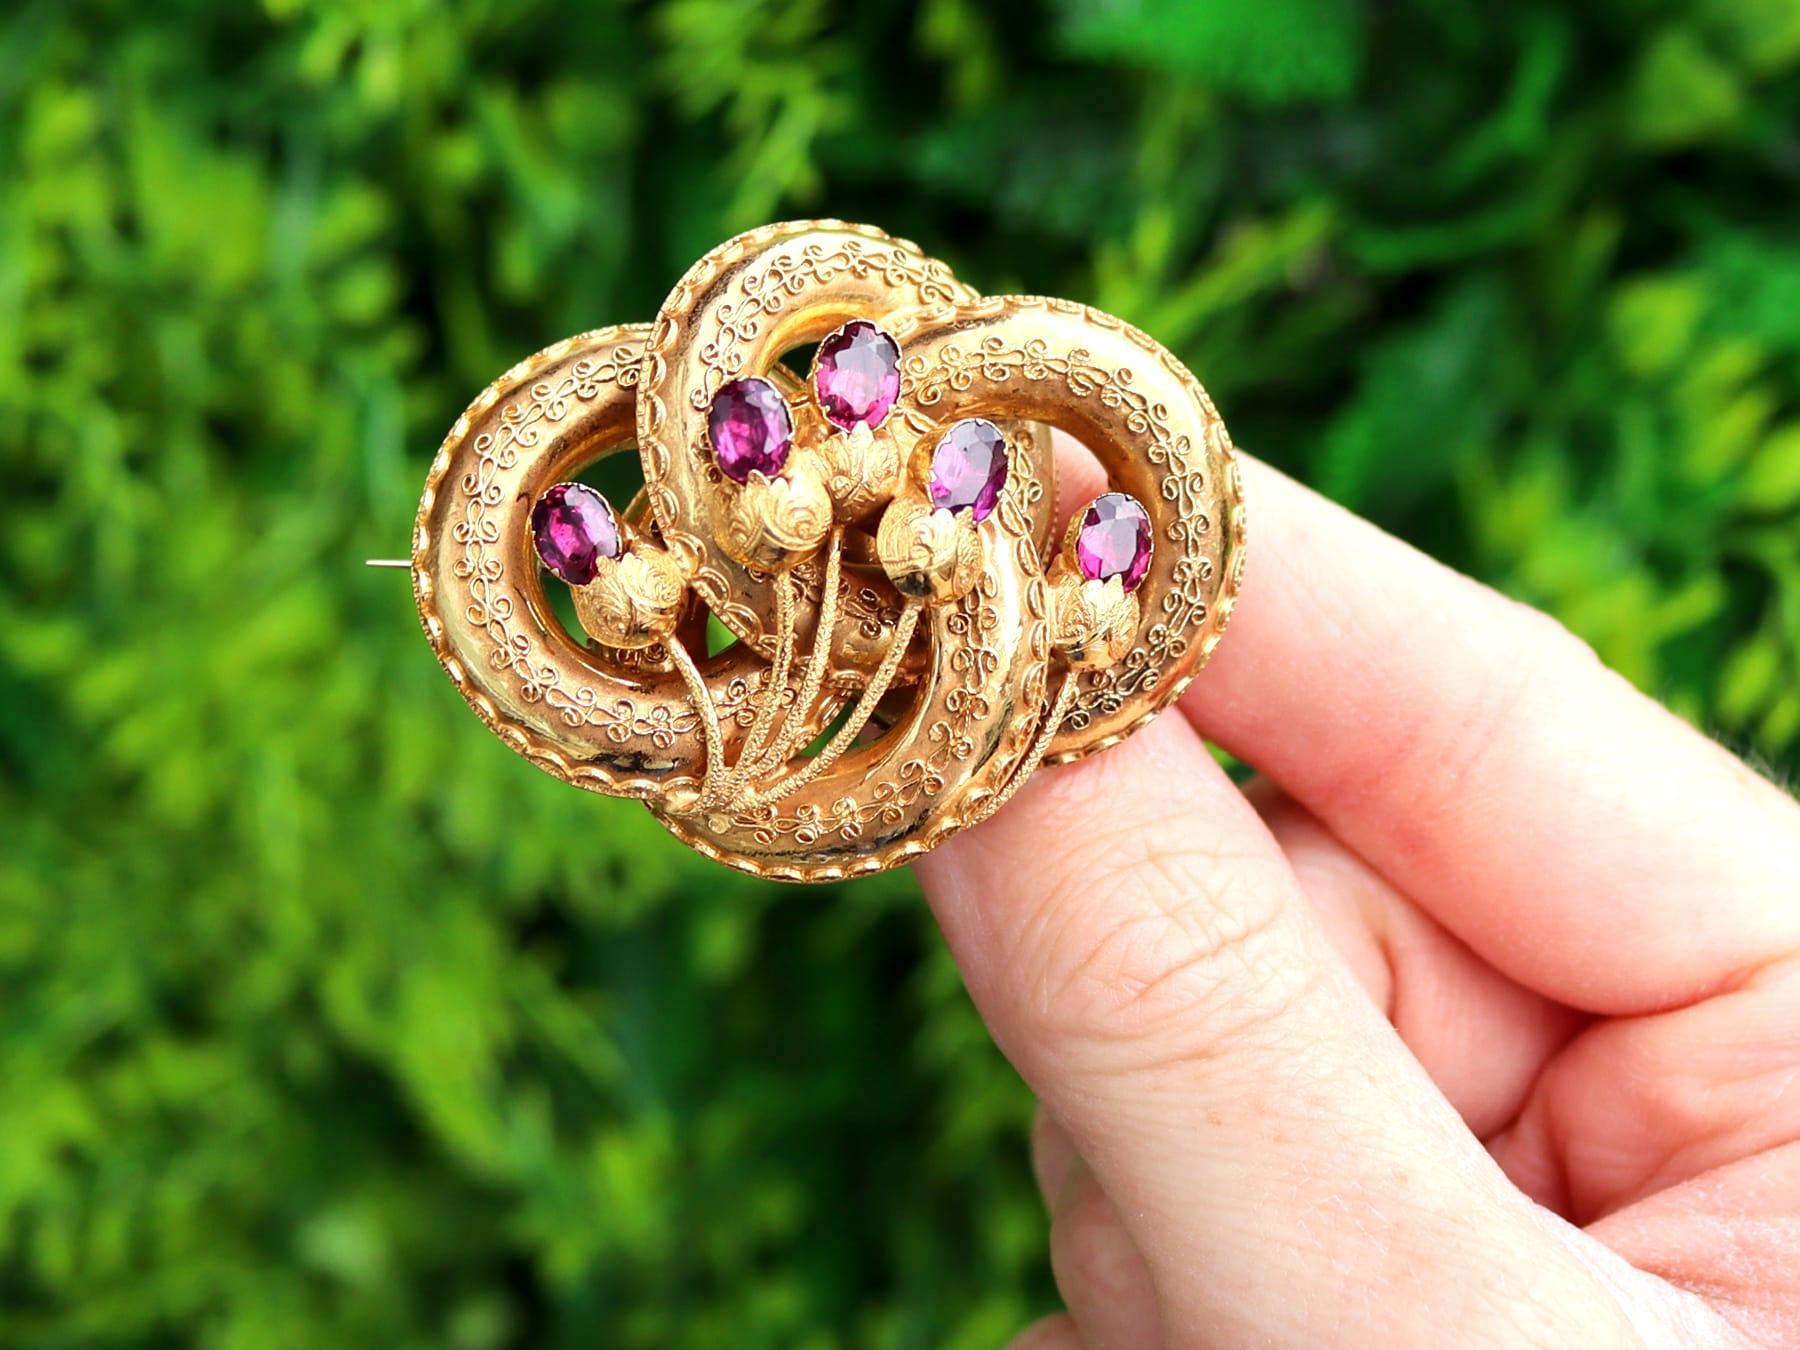 This excellent, fine and impressive antique brooch has been crafted in 21ct yellow gold.

The brooch has an interlacing knotted form, accented with applied scrolling filigree style decoration, all in an iconic Victorian design.

The brooch is